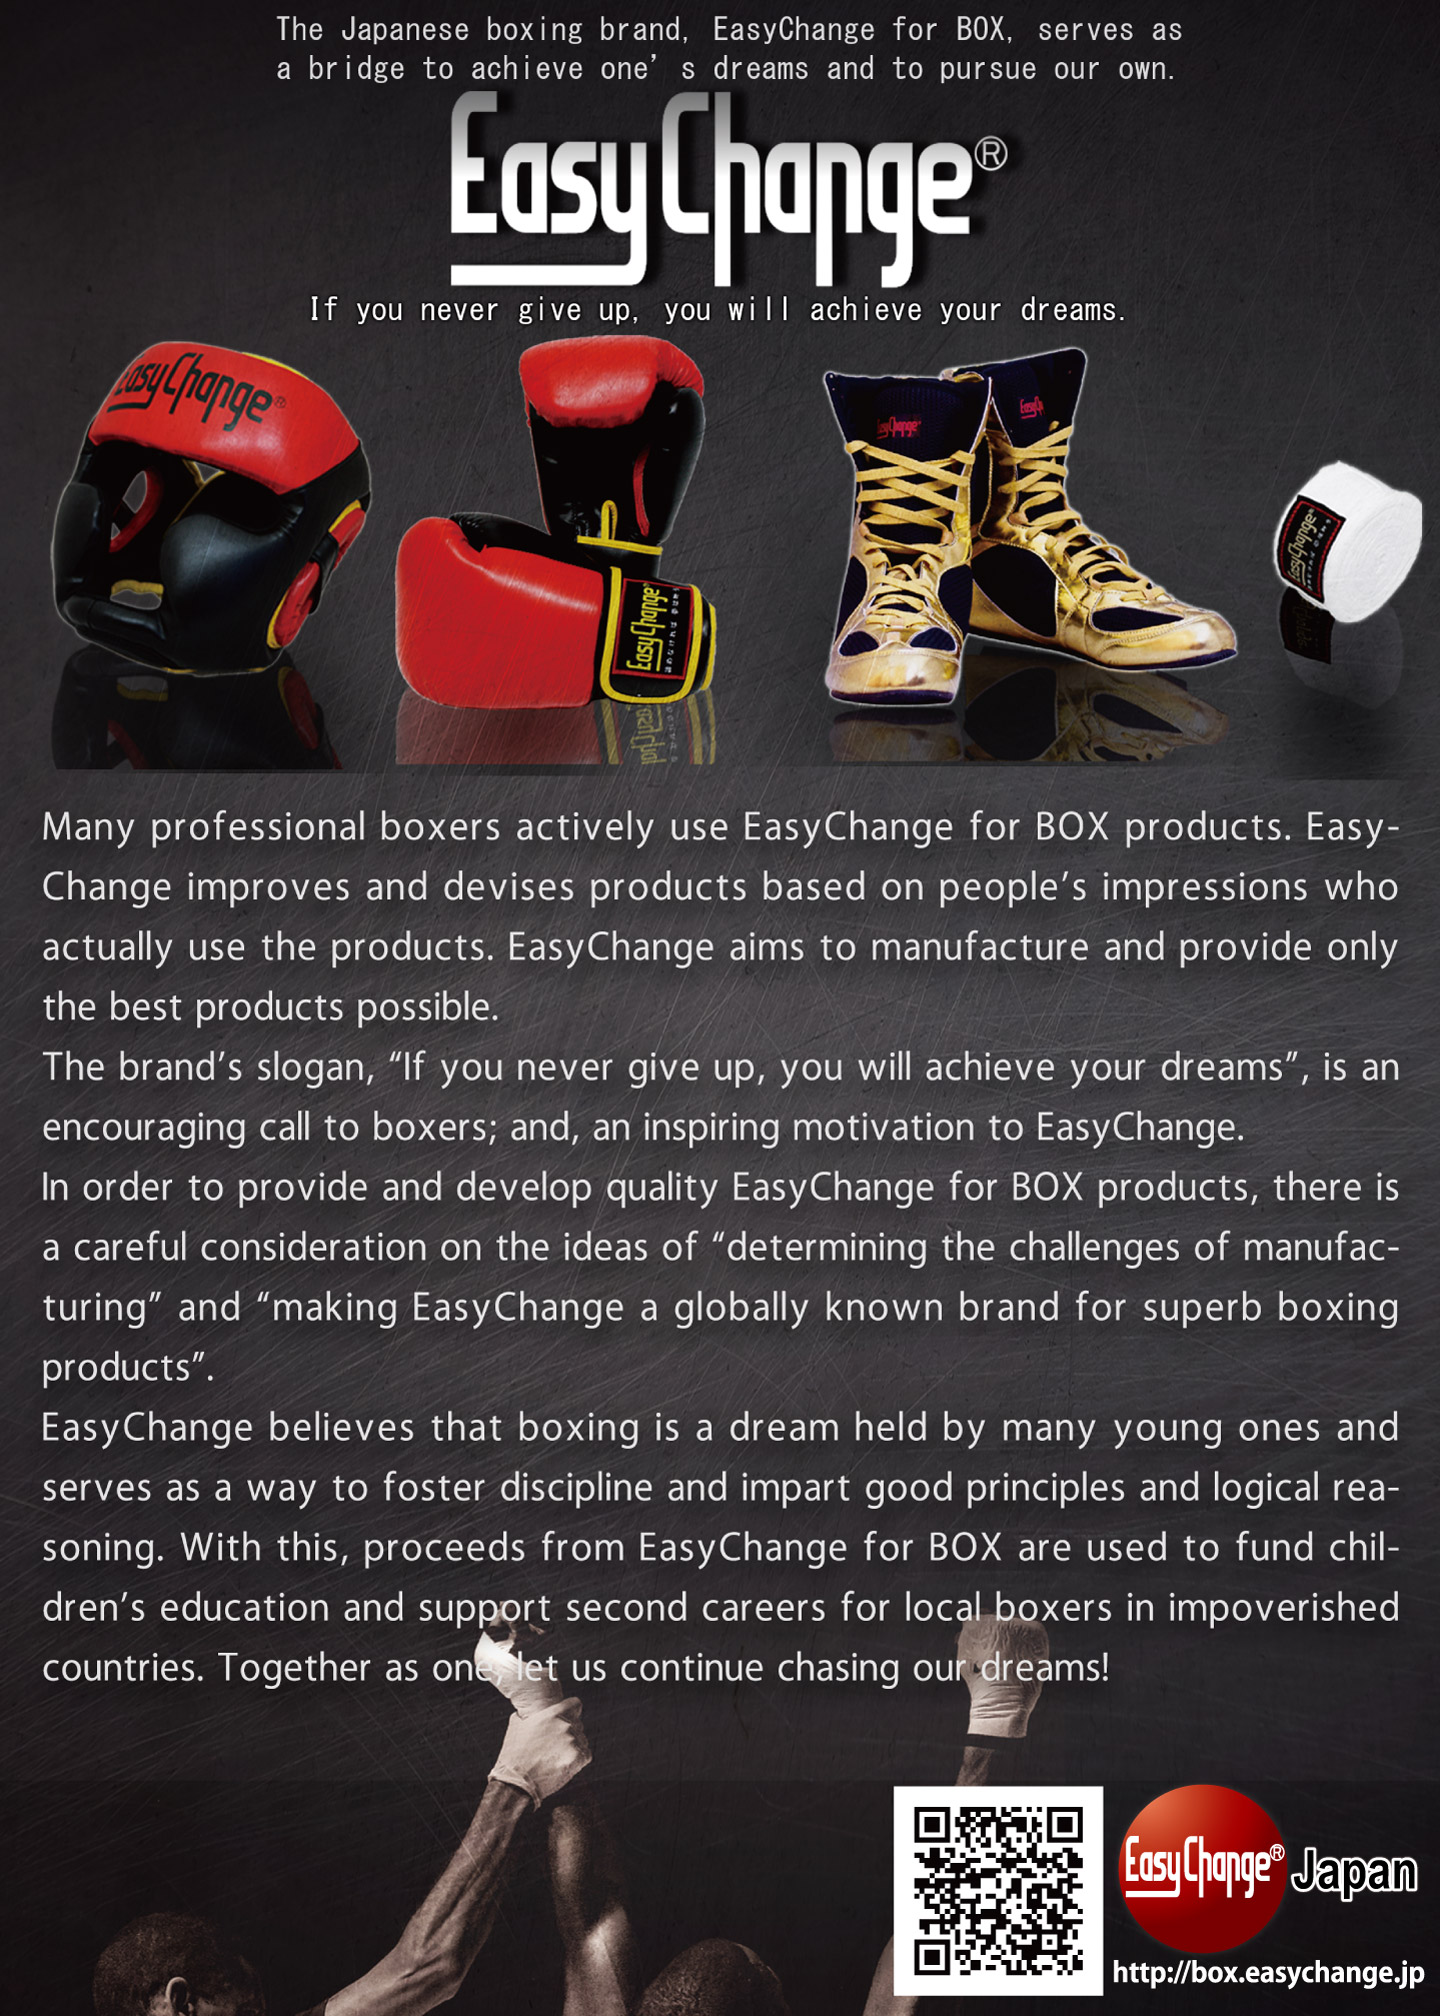 The Japanese boxing brand -EasyChange for BOX- The dream comes true if you do not give it up. We support your dream and ourselves continue challenging it without giving up our dream.